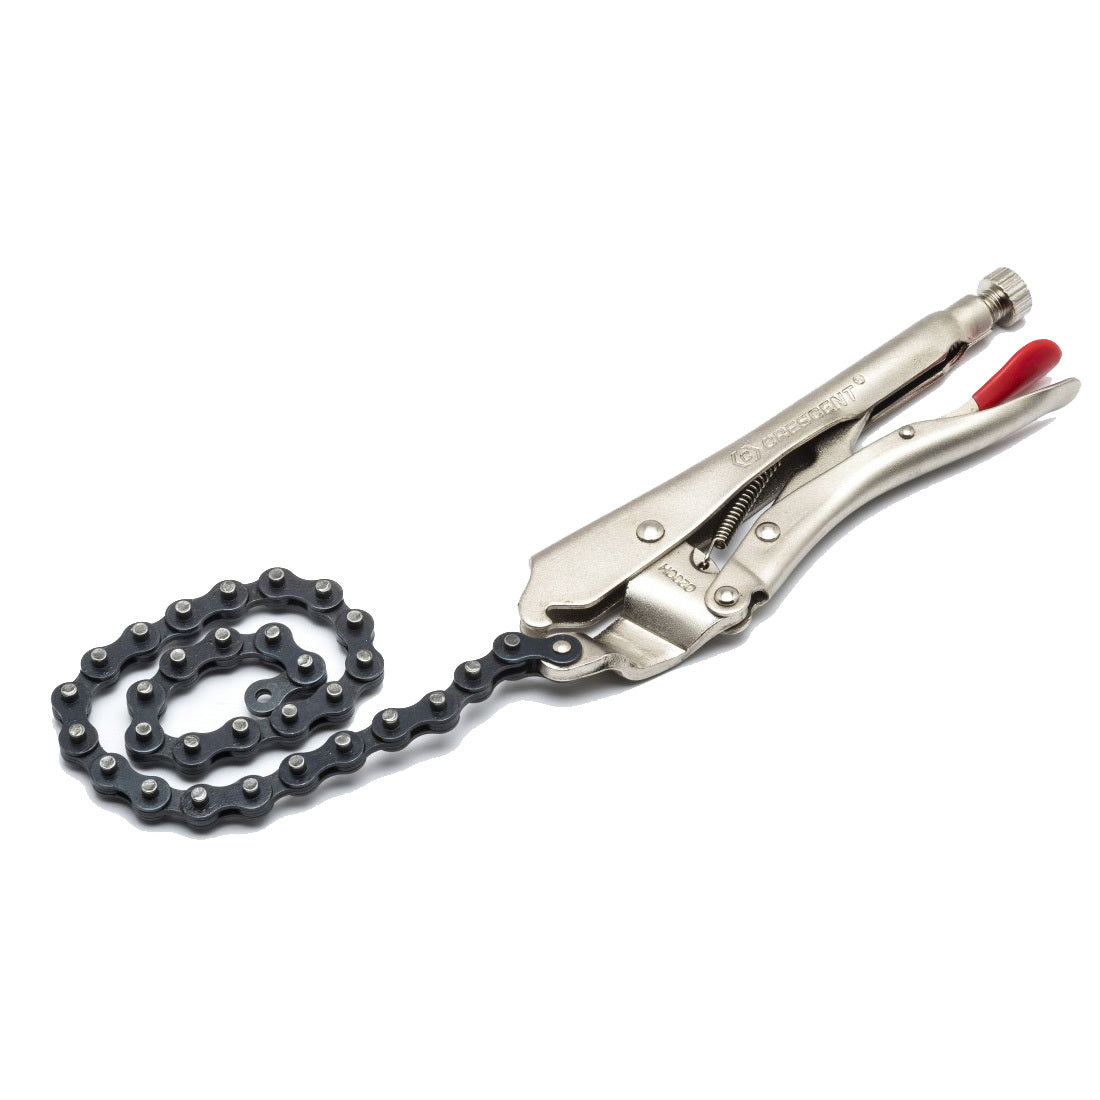 230mm (9") Chain Clamp Locking Plier C20CHN by Crescent